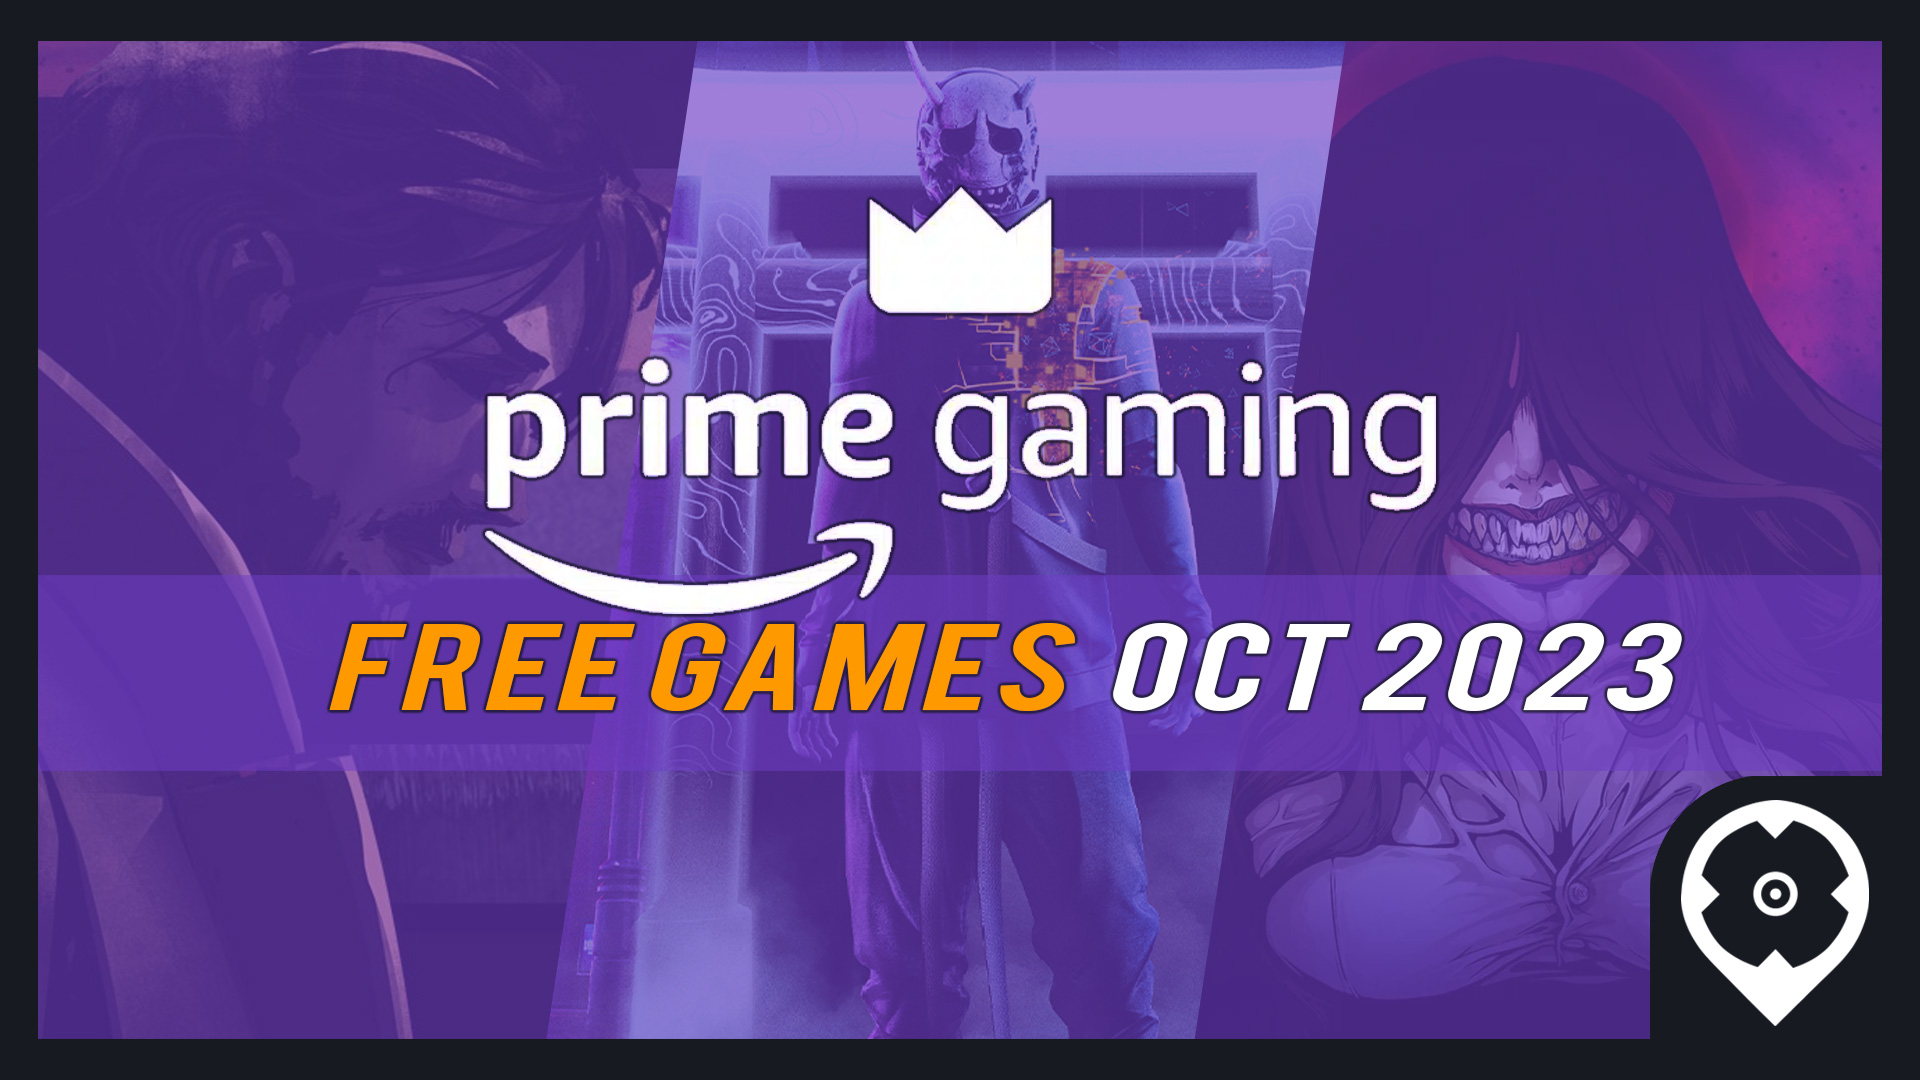 Twitch Prime has become Prime Gaming with 23 free games